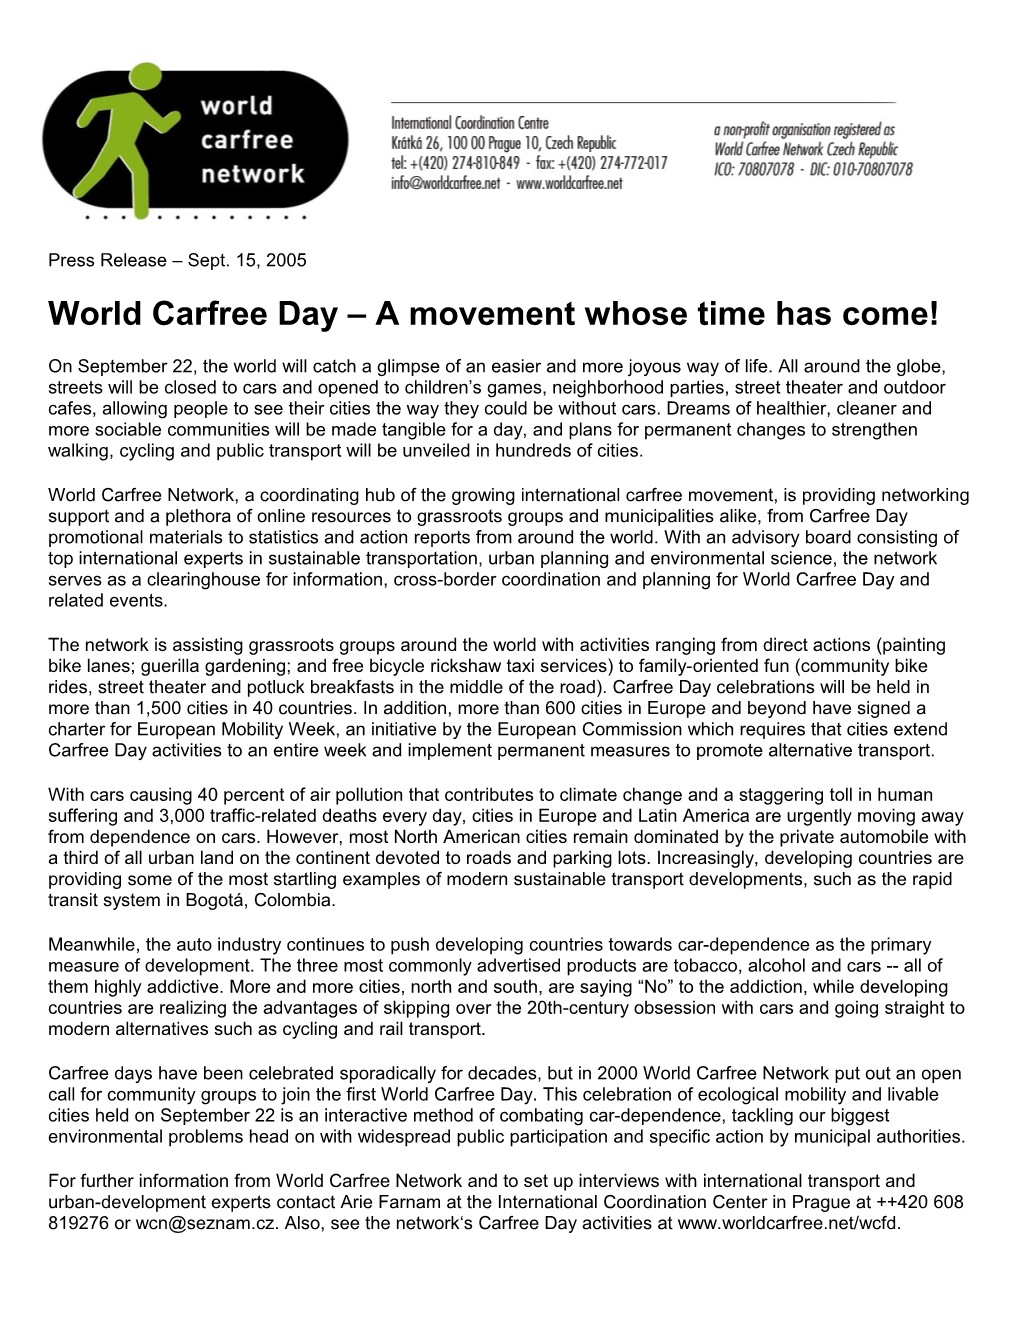 World Carfree Day a Movement Whose Time Has Come!